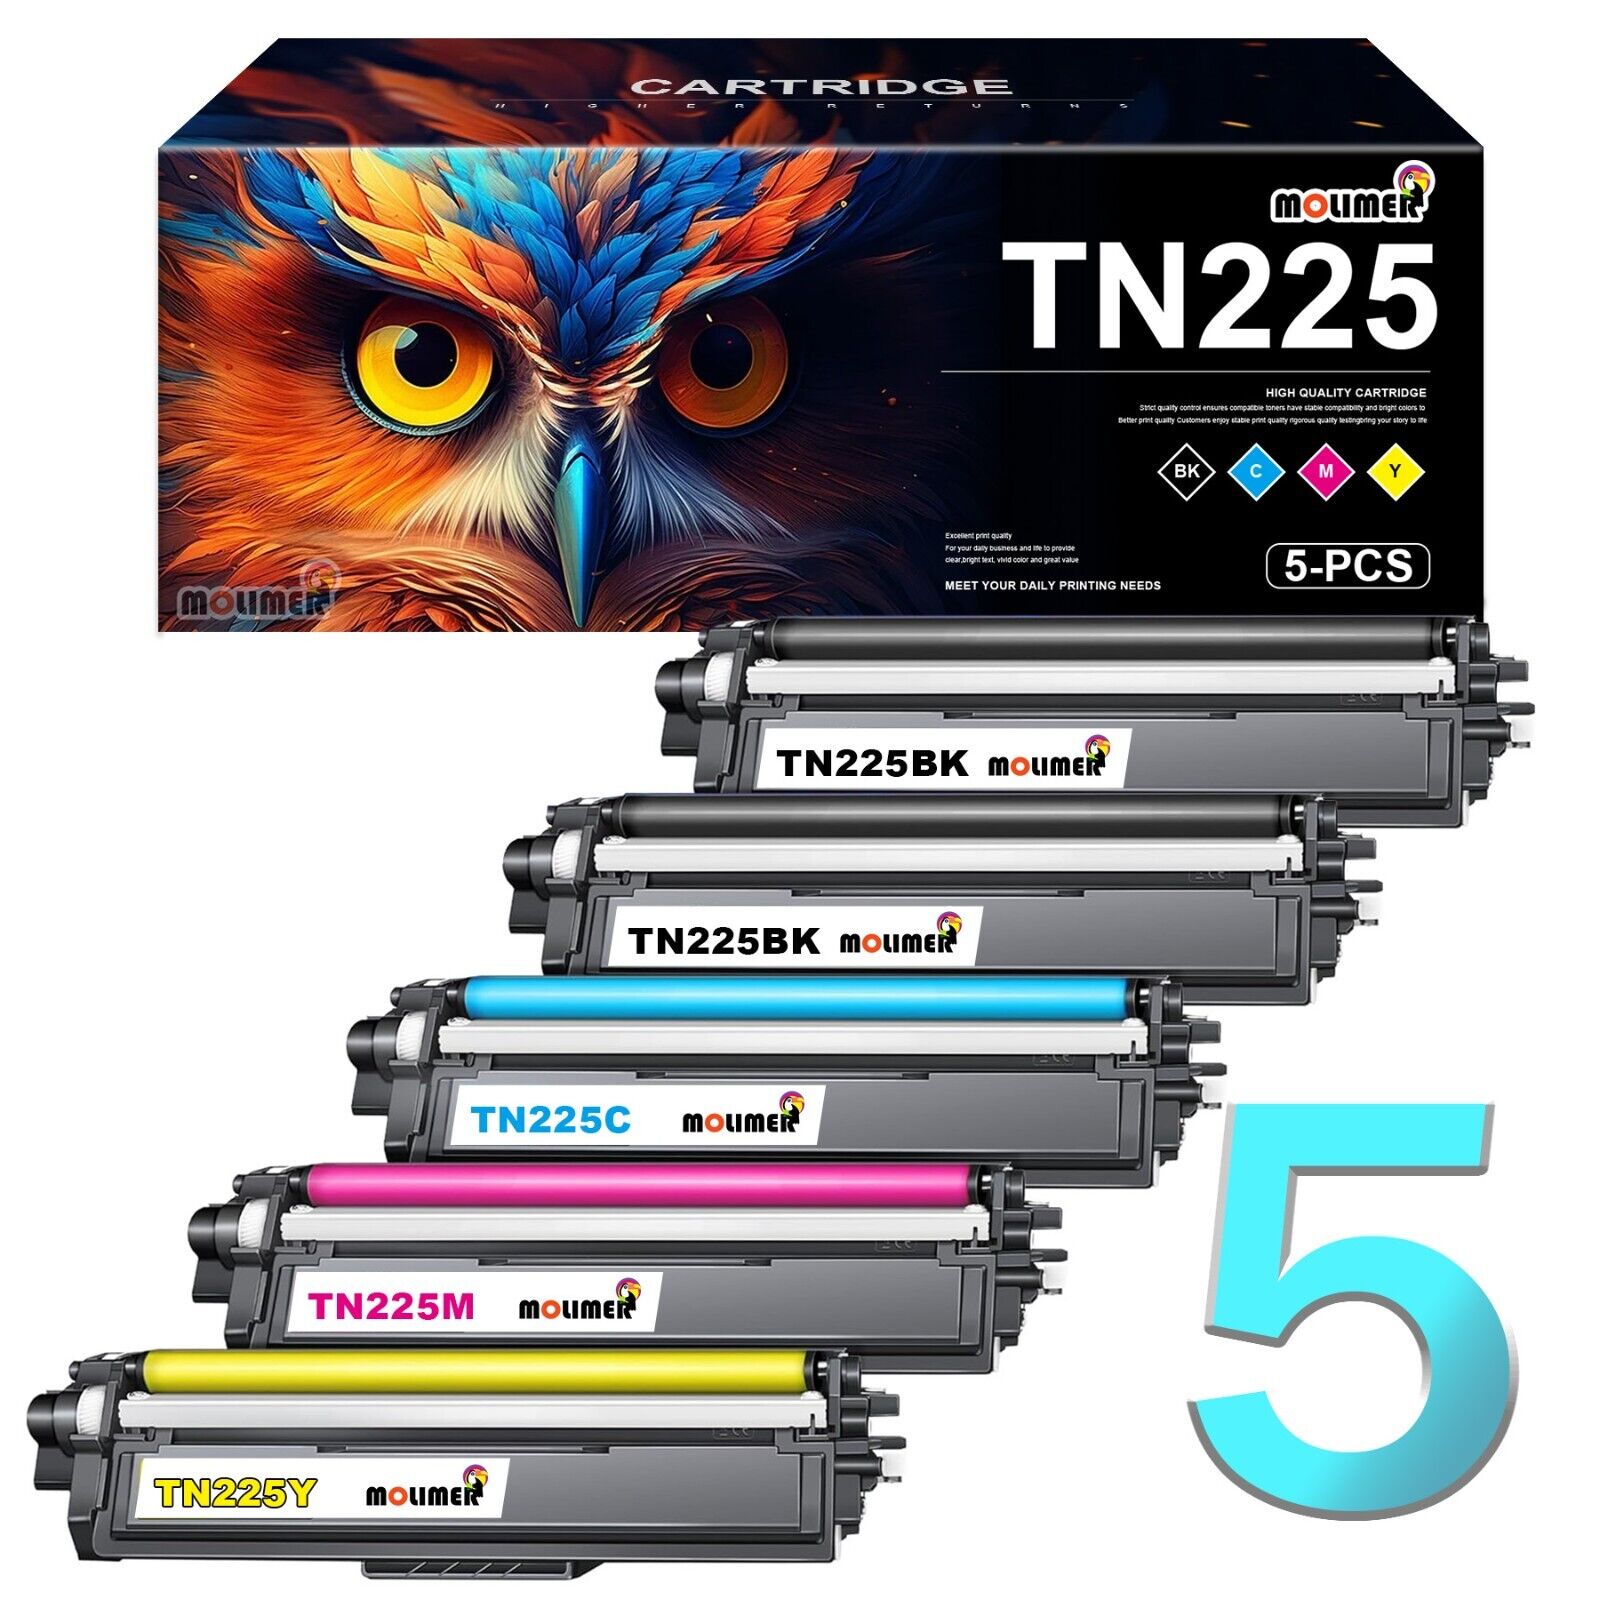 TN225 Toner Cartridge Replacement for Brother HL-3140CW HL-3170CDW 3180CDW 5 PK